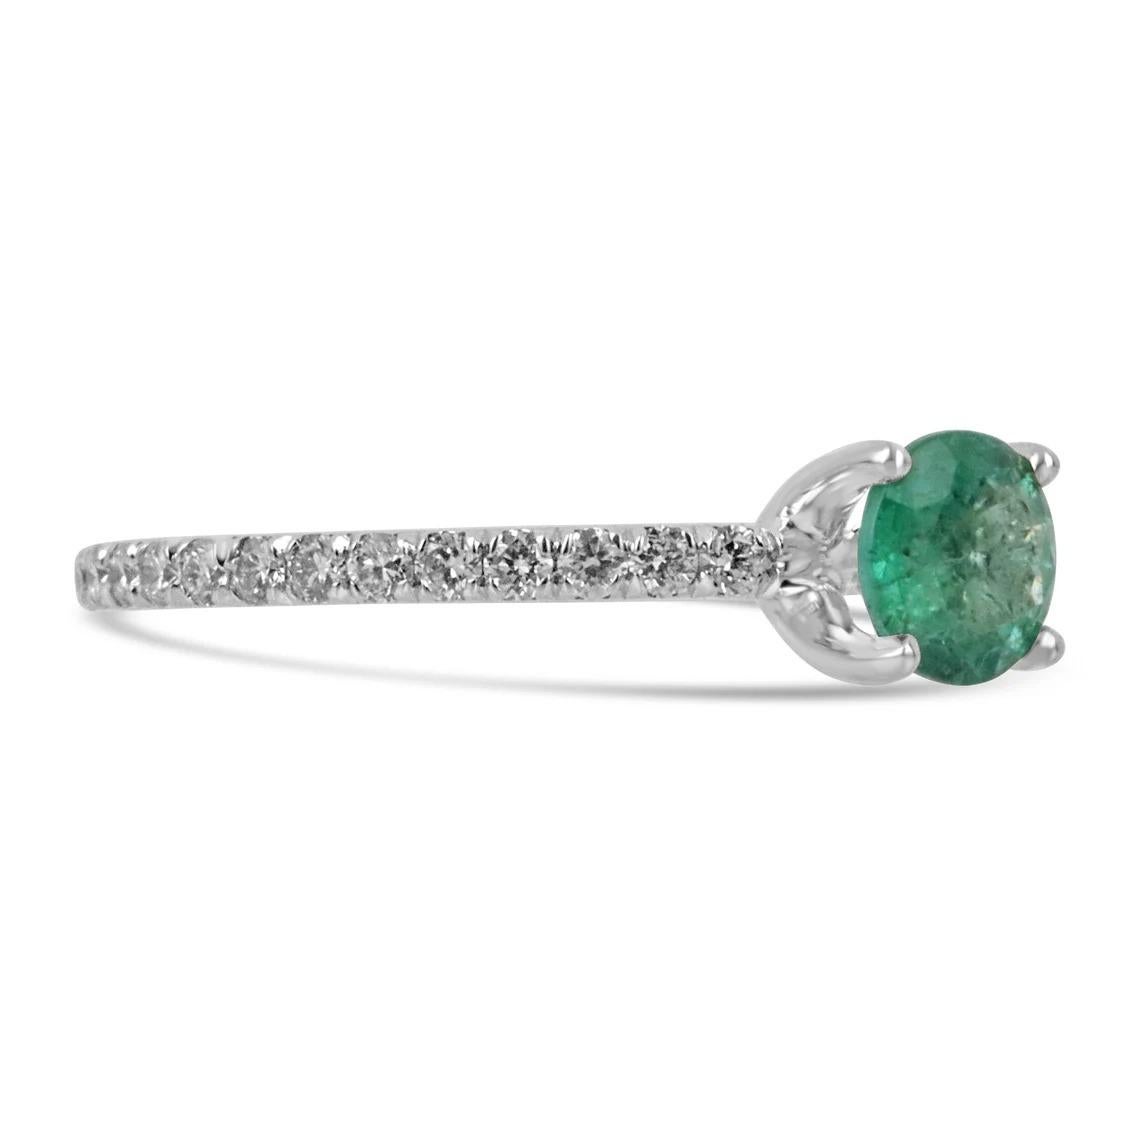 Elegantly displayed is a natural round-cut emerald and diamond ring. The center gem is a beautiful quality, round cut, emerald filled with life and brilliance! Among the emeralds, impressive qualities are their vibrant color and beautiful eye